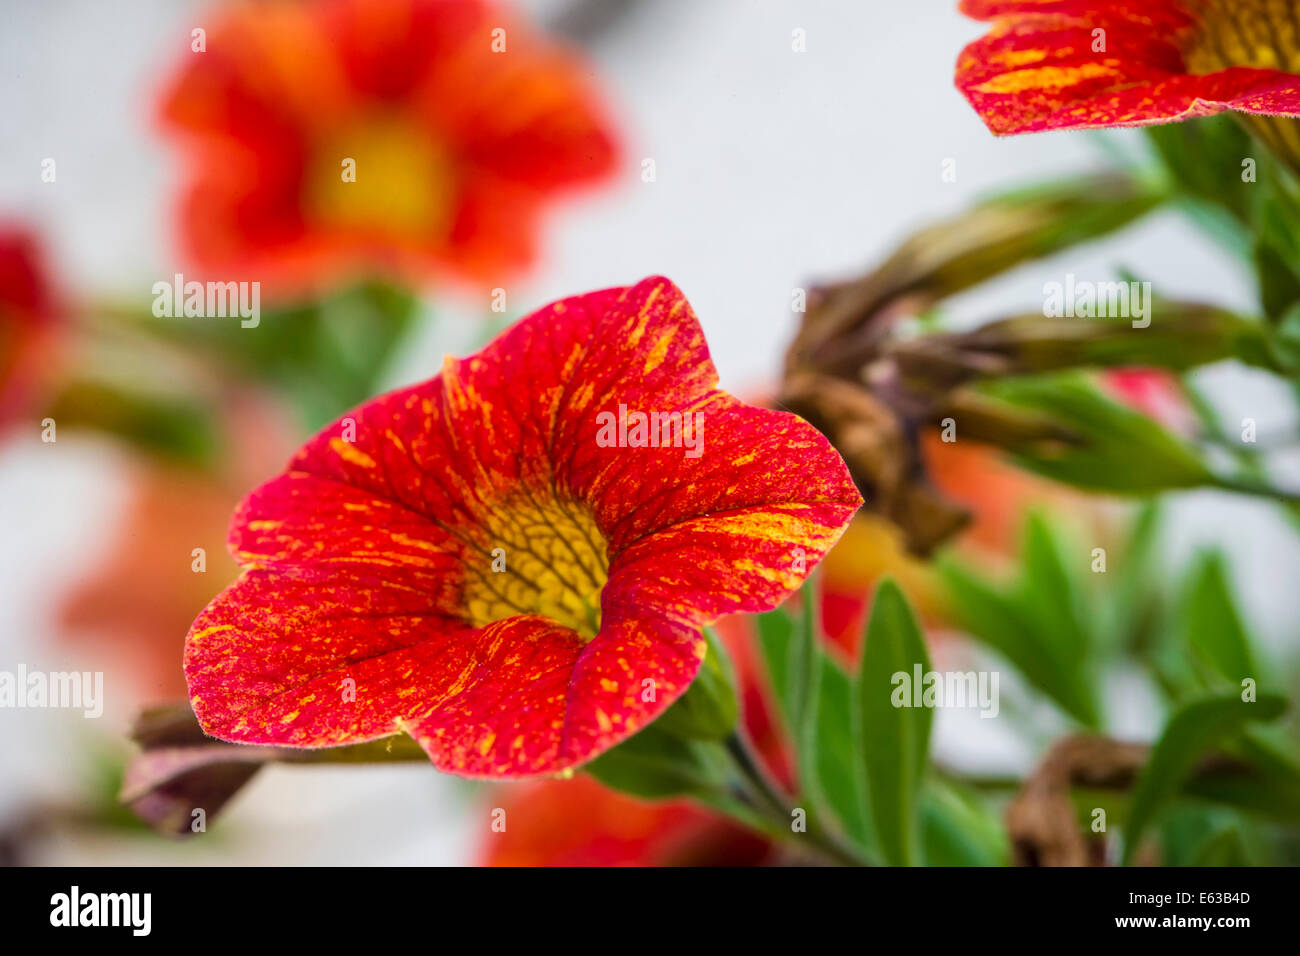 A vibrant red and yellow Petunia Million Bells flower against a pleasantly blurred green, floral and white background Stock Photo